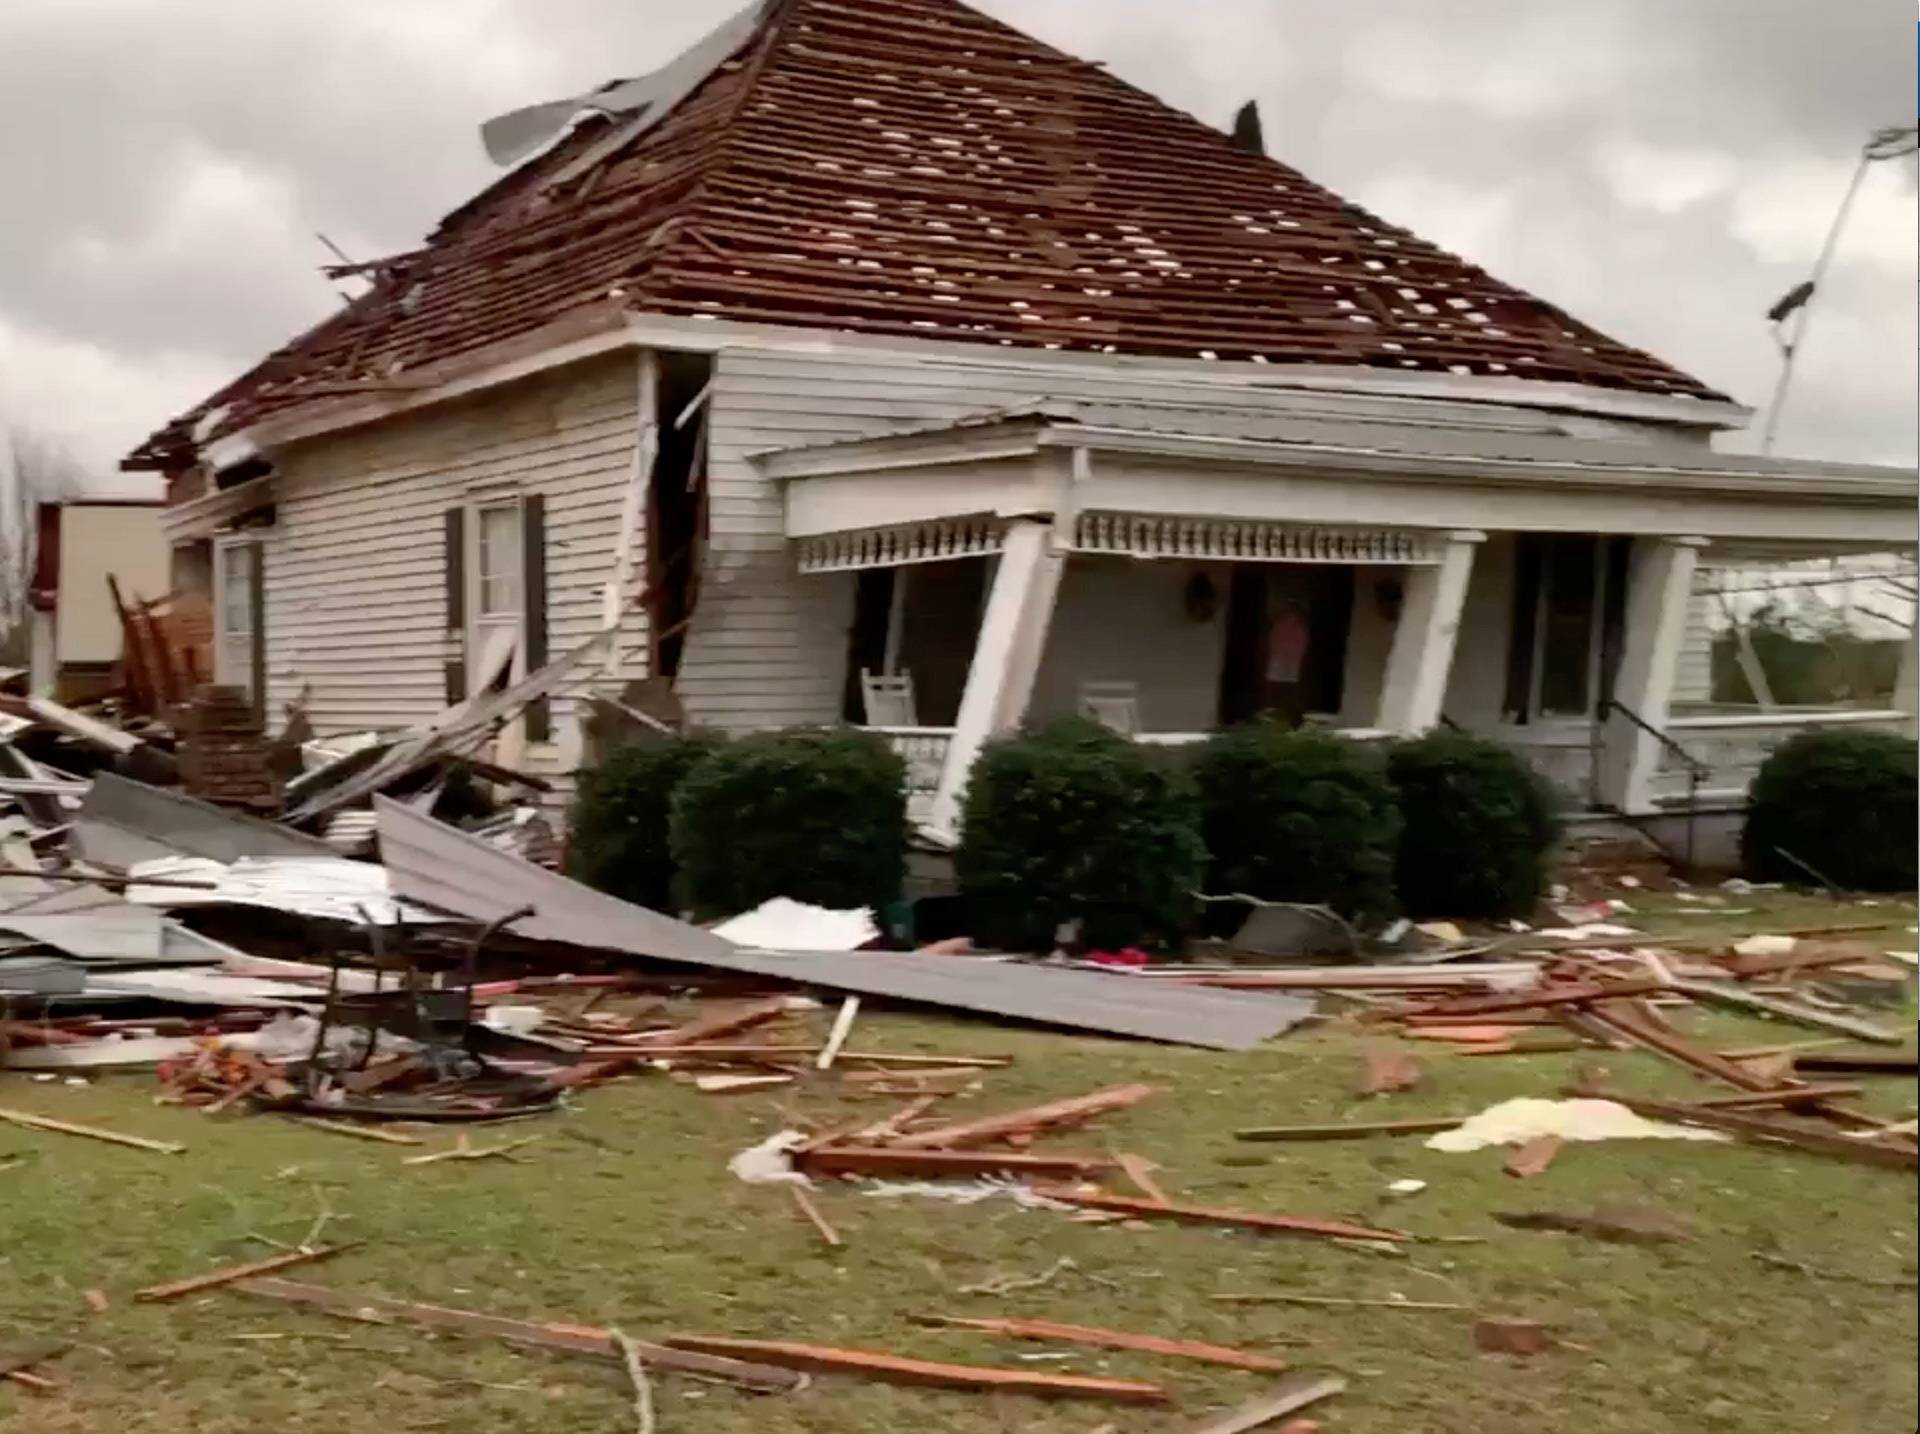 Debris and a damaged house seen following a tornado in Beauregard, Alabama, U.S. in this March 3, 2019 still image obtained from social media video